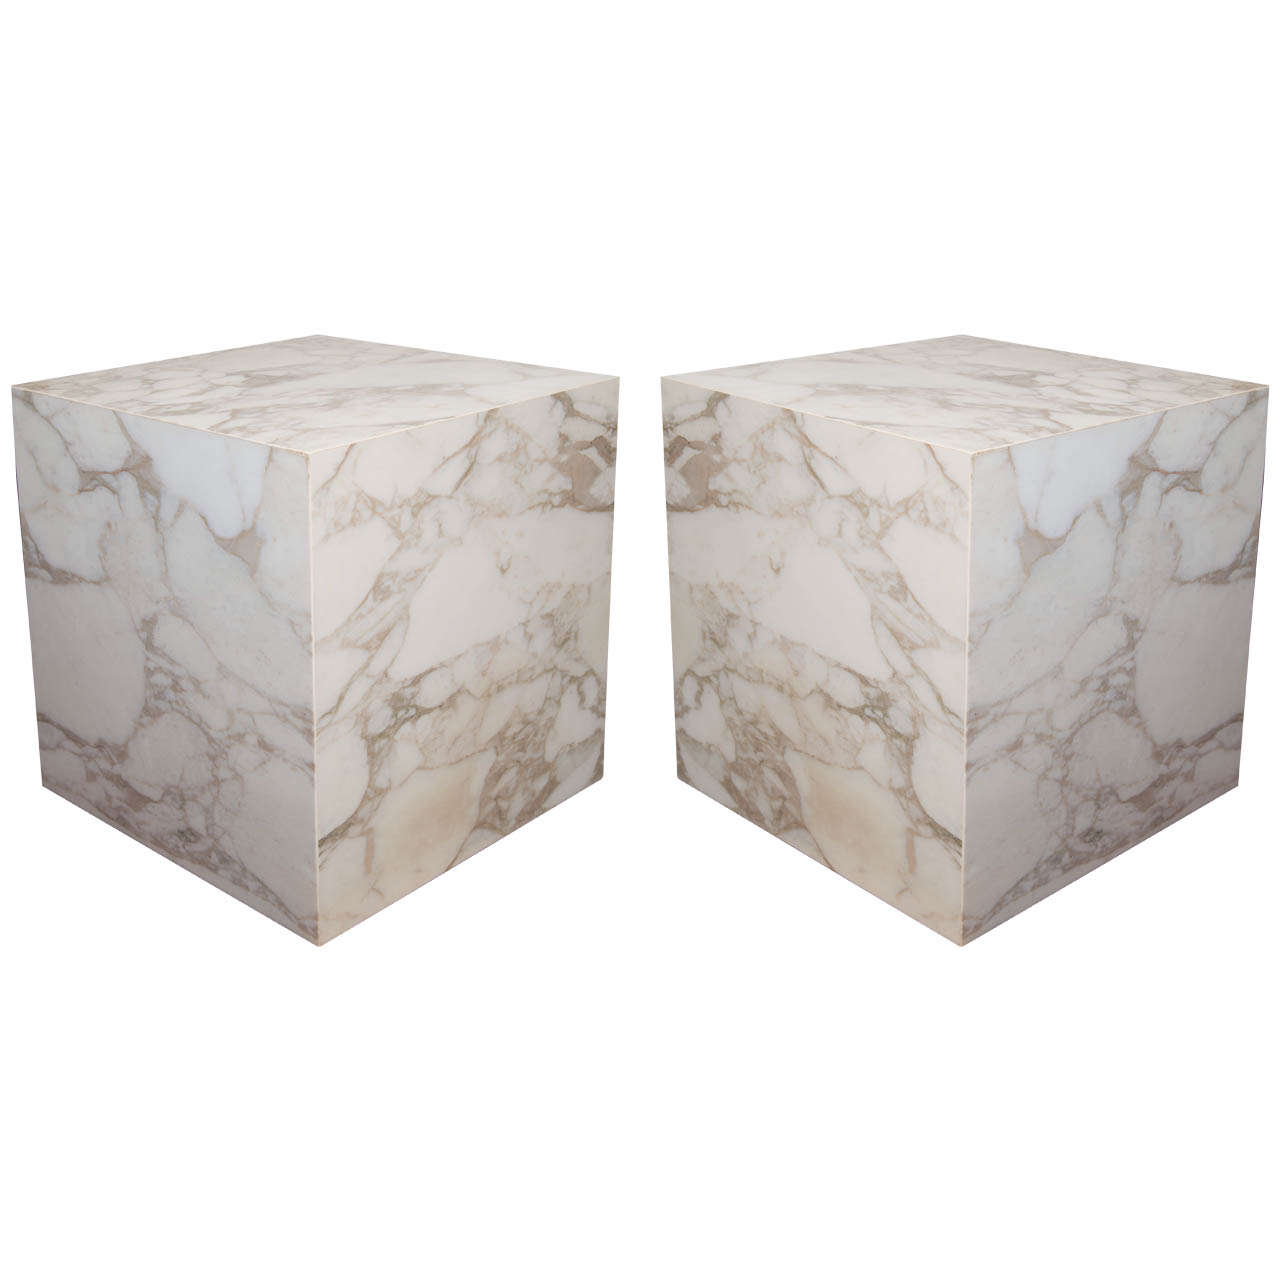 A Mid Century Pair of Cube Form Solid Marble Slab End or Side Tables